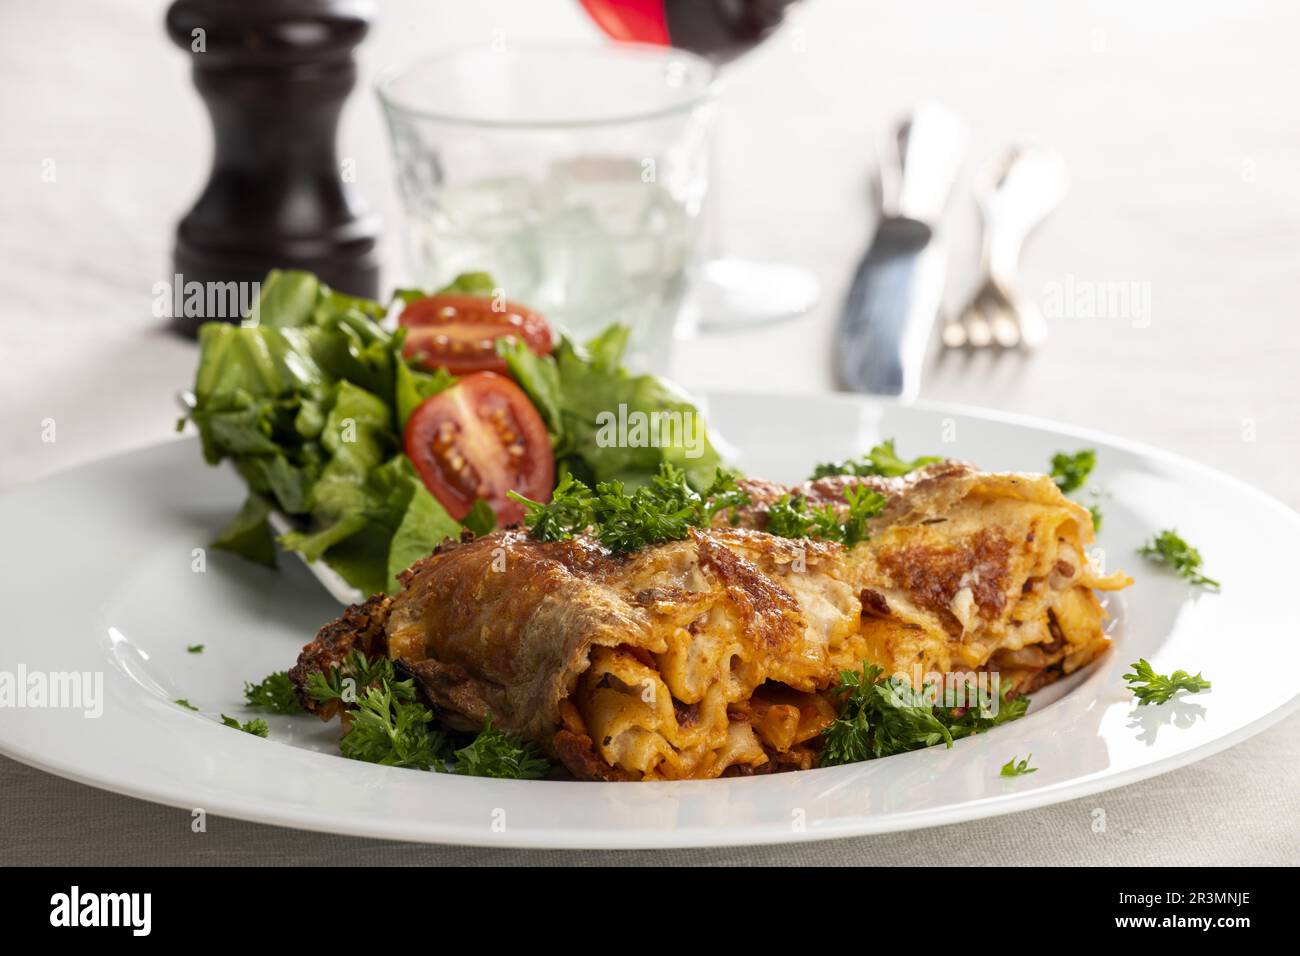 Portion of lasagna on a white plate Stock Photo